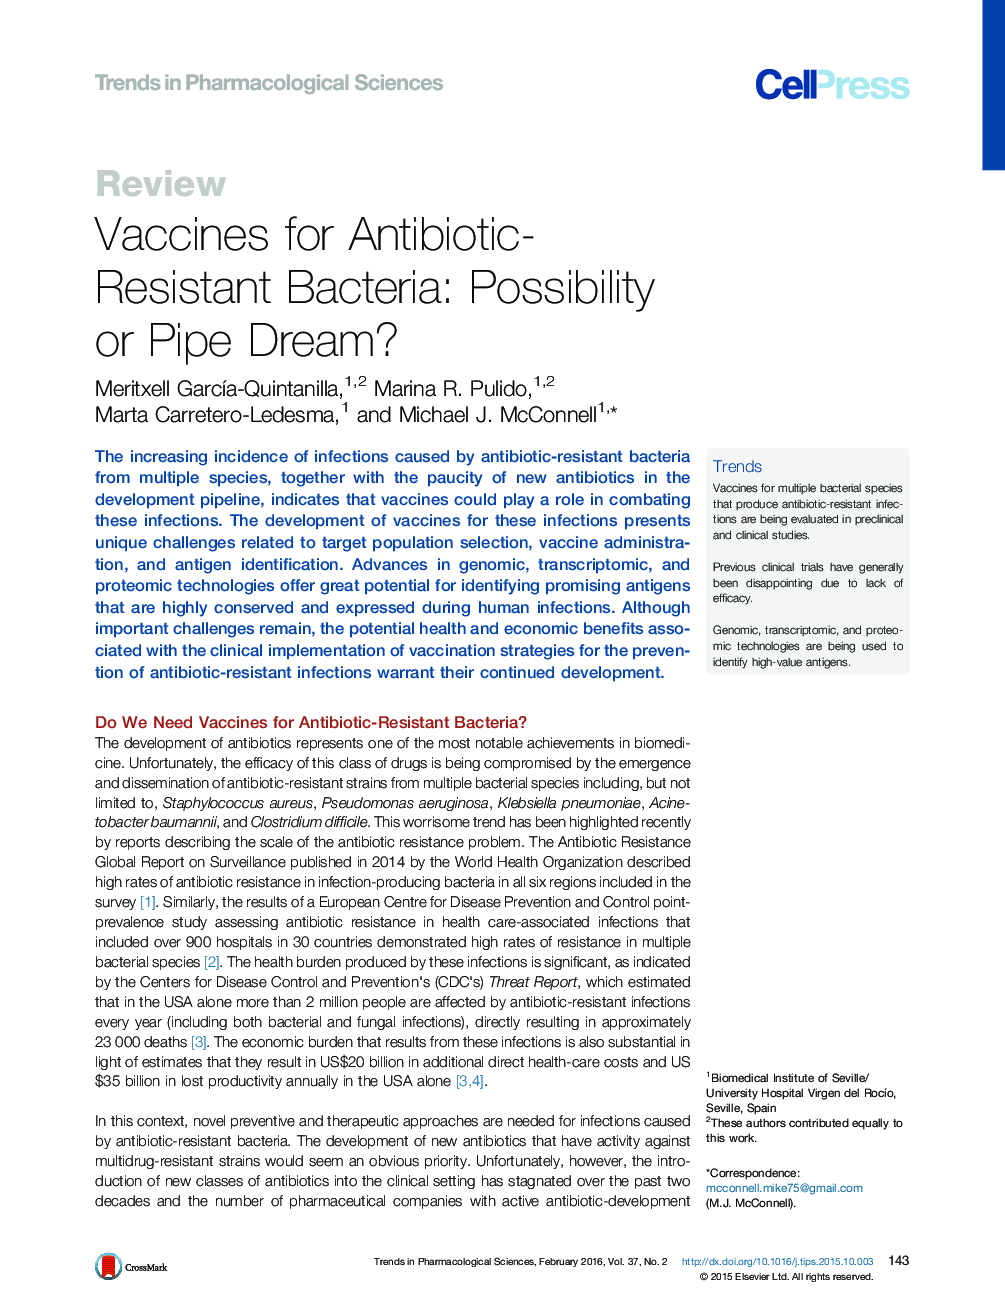 Vaccines for Antibiotic-Resistant Bacteria: Possibility or Pipe Dream?